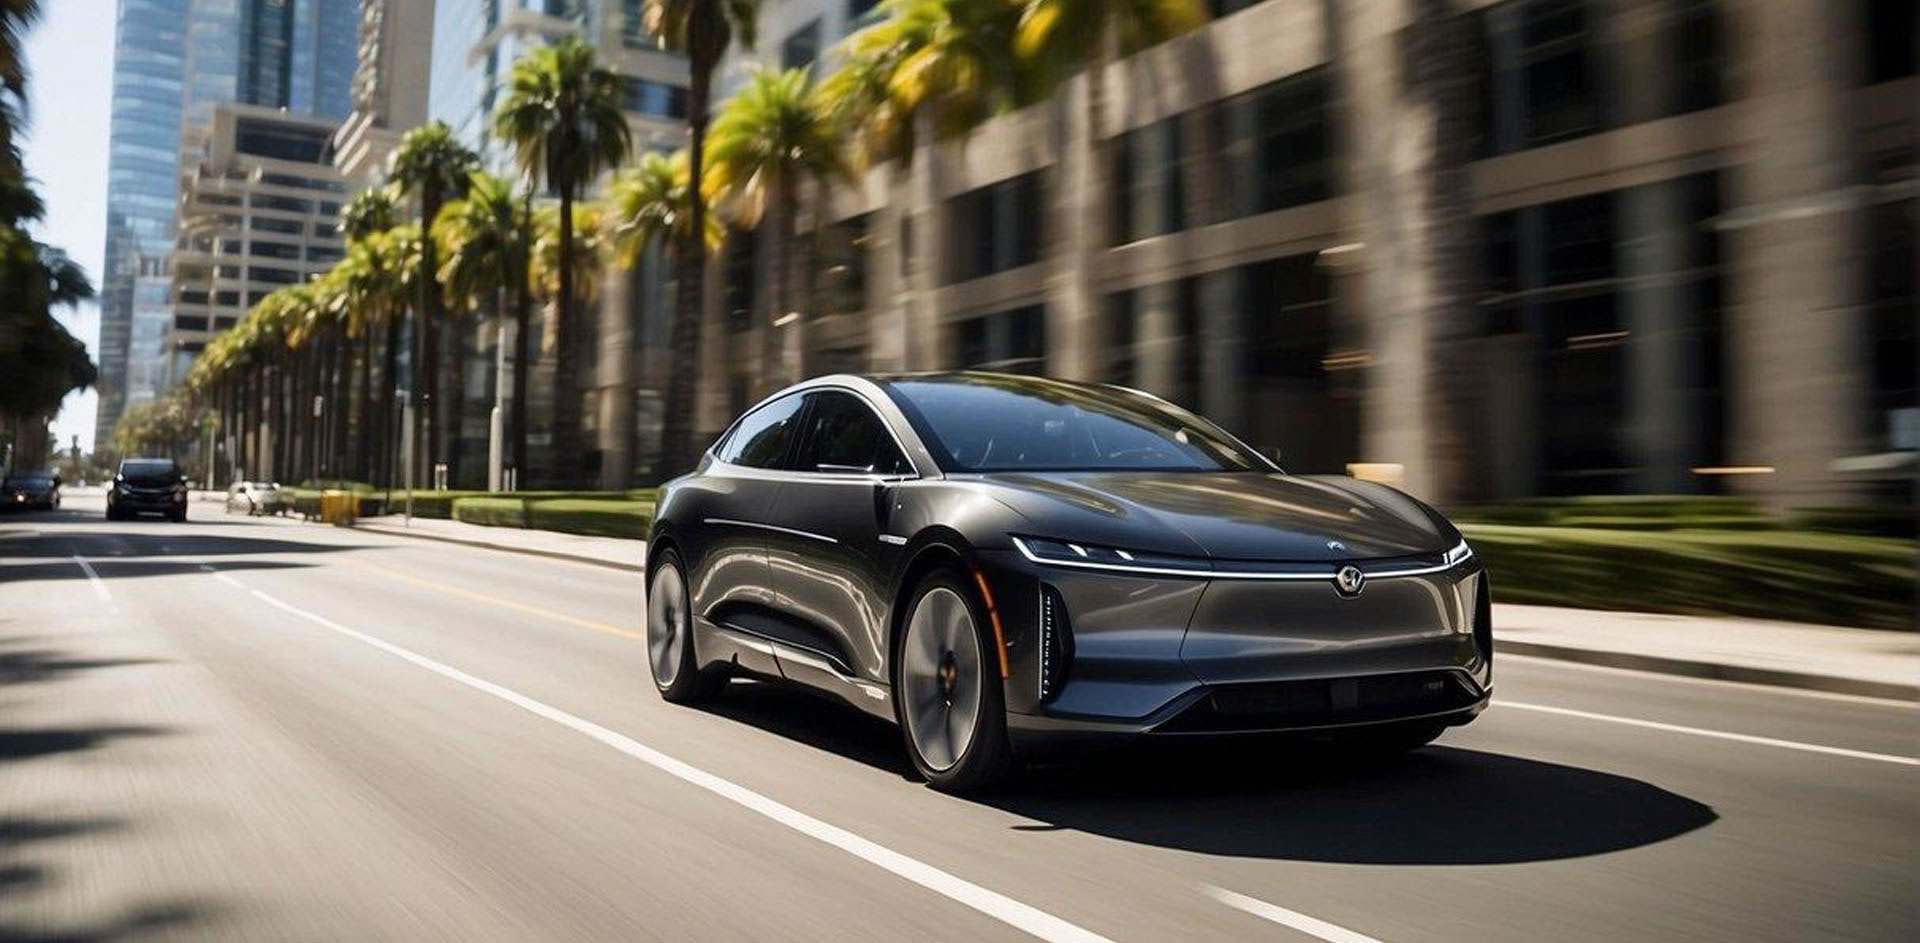 A sleek electric car glides through the streets of San Diego, passing by modern skyscrapers and lush greenery. The vehicle exudes luxury and sophistication, emitting zero emissions as it transports executives to their corporate destinations